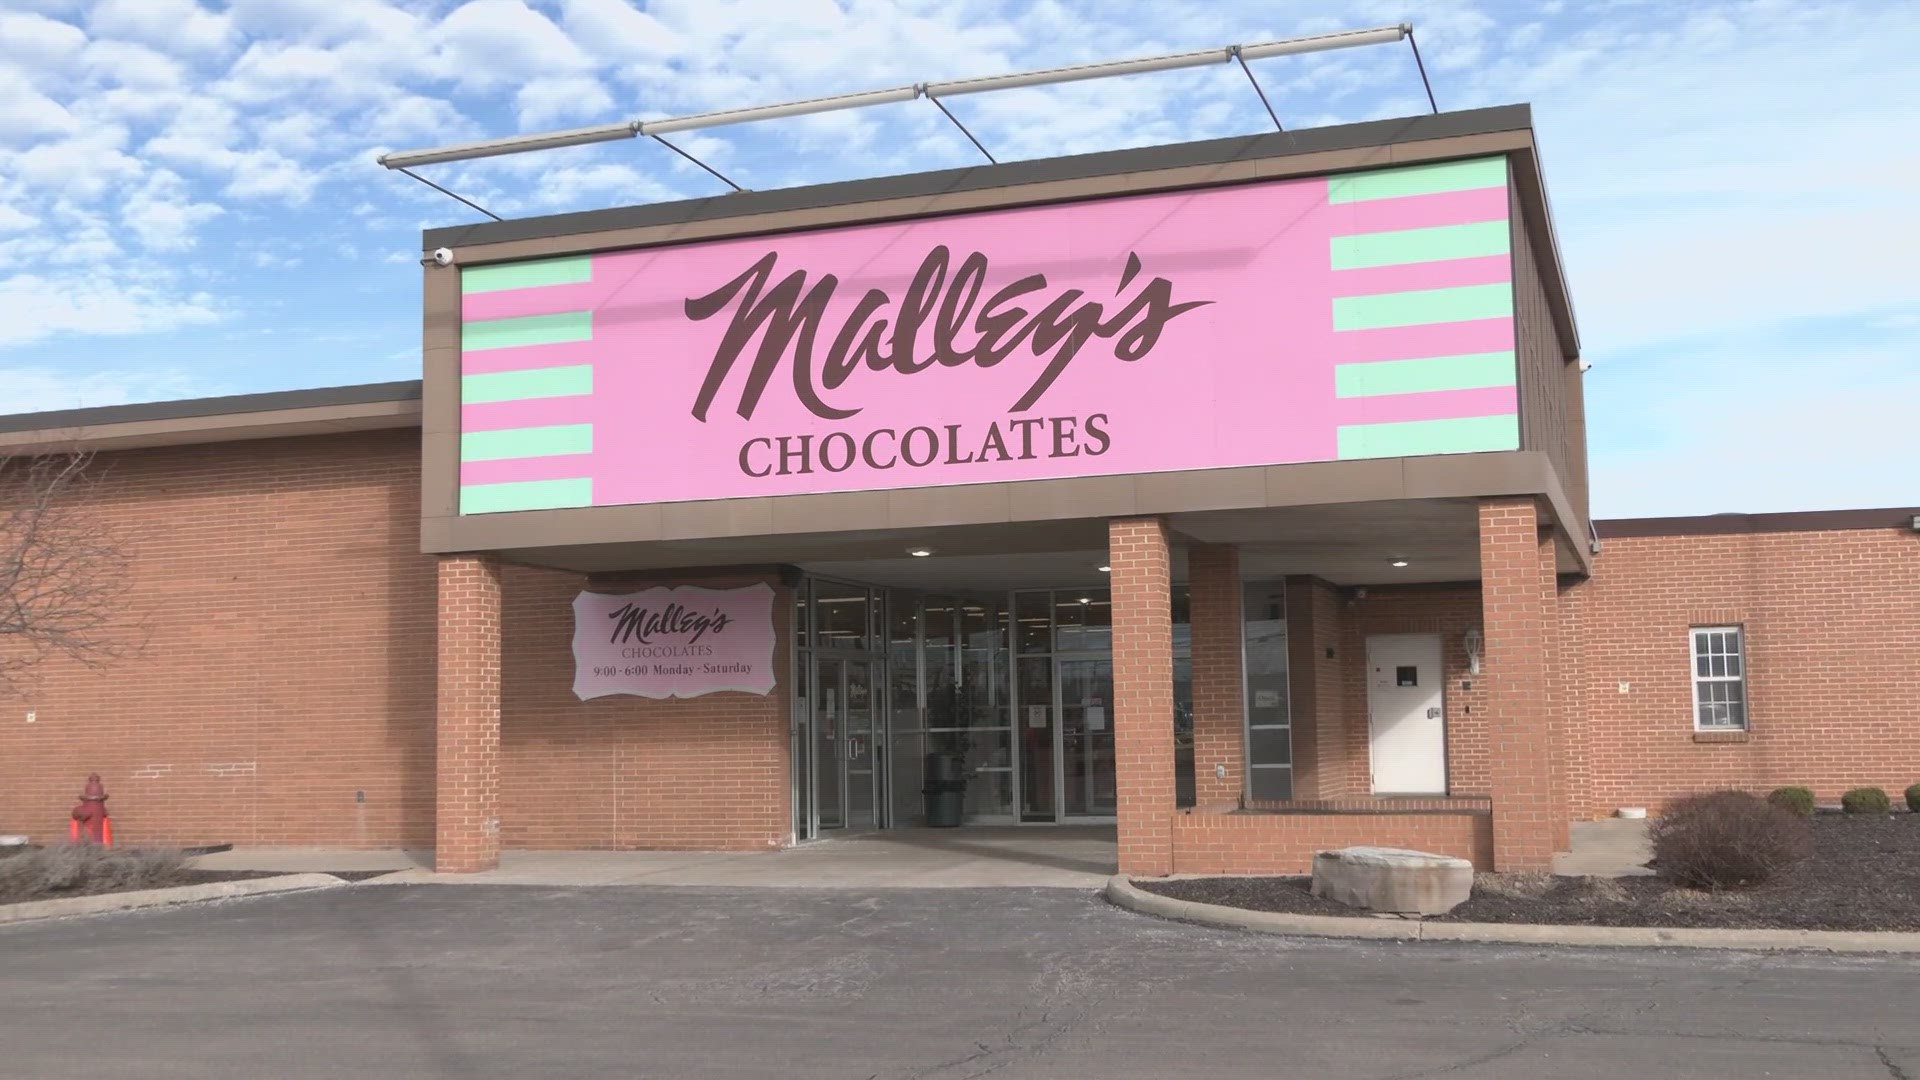 Are you looking for chocolates this Valentine's Day? Look no further than Malley's.